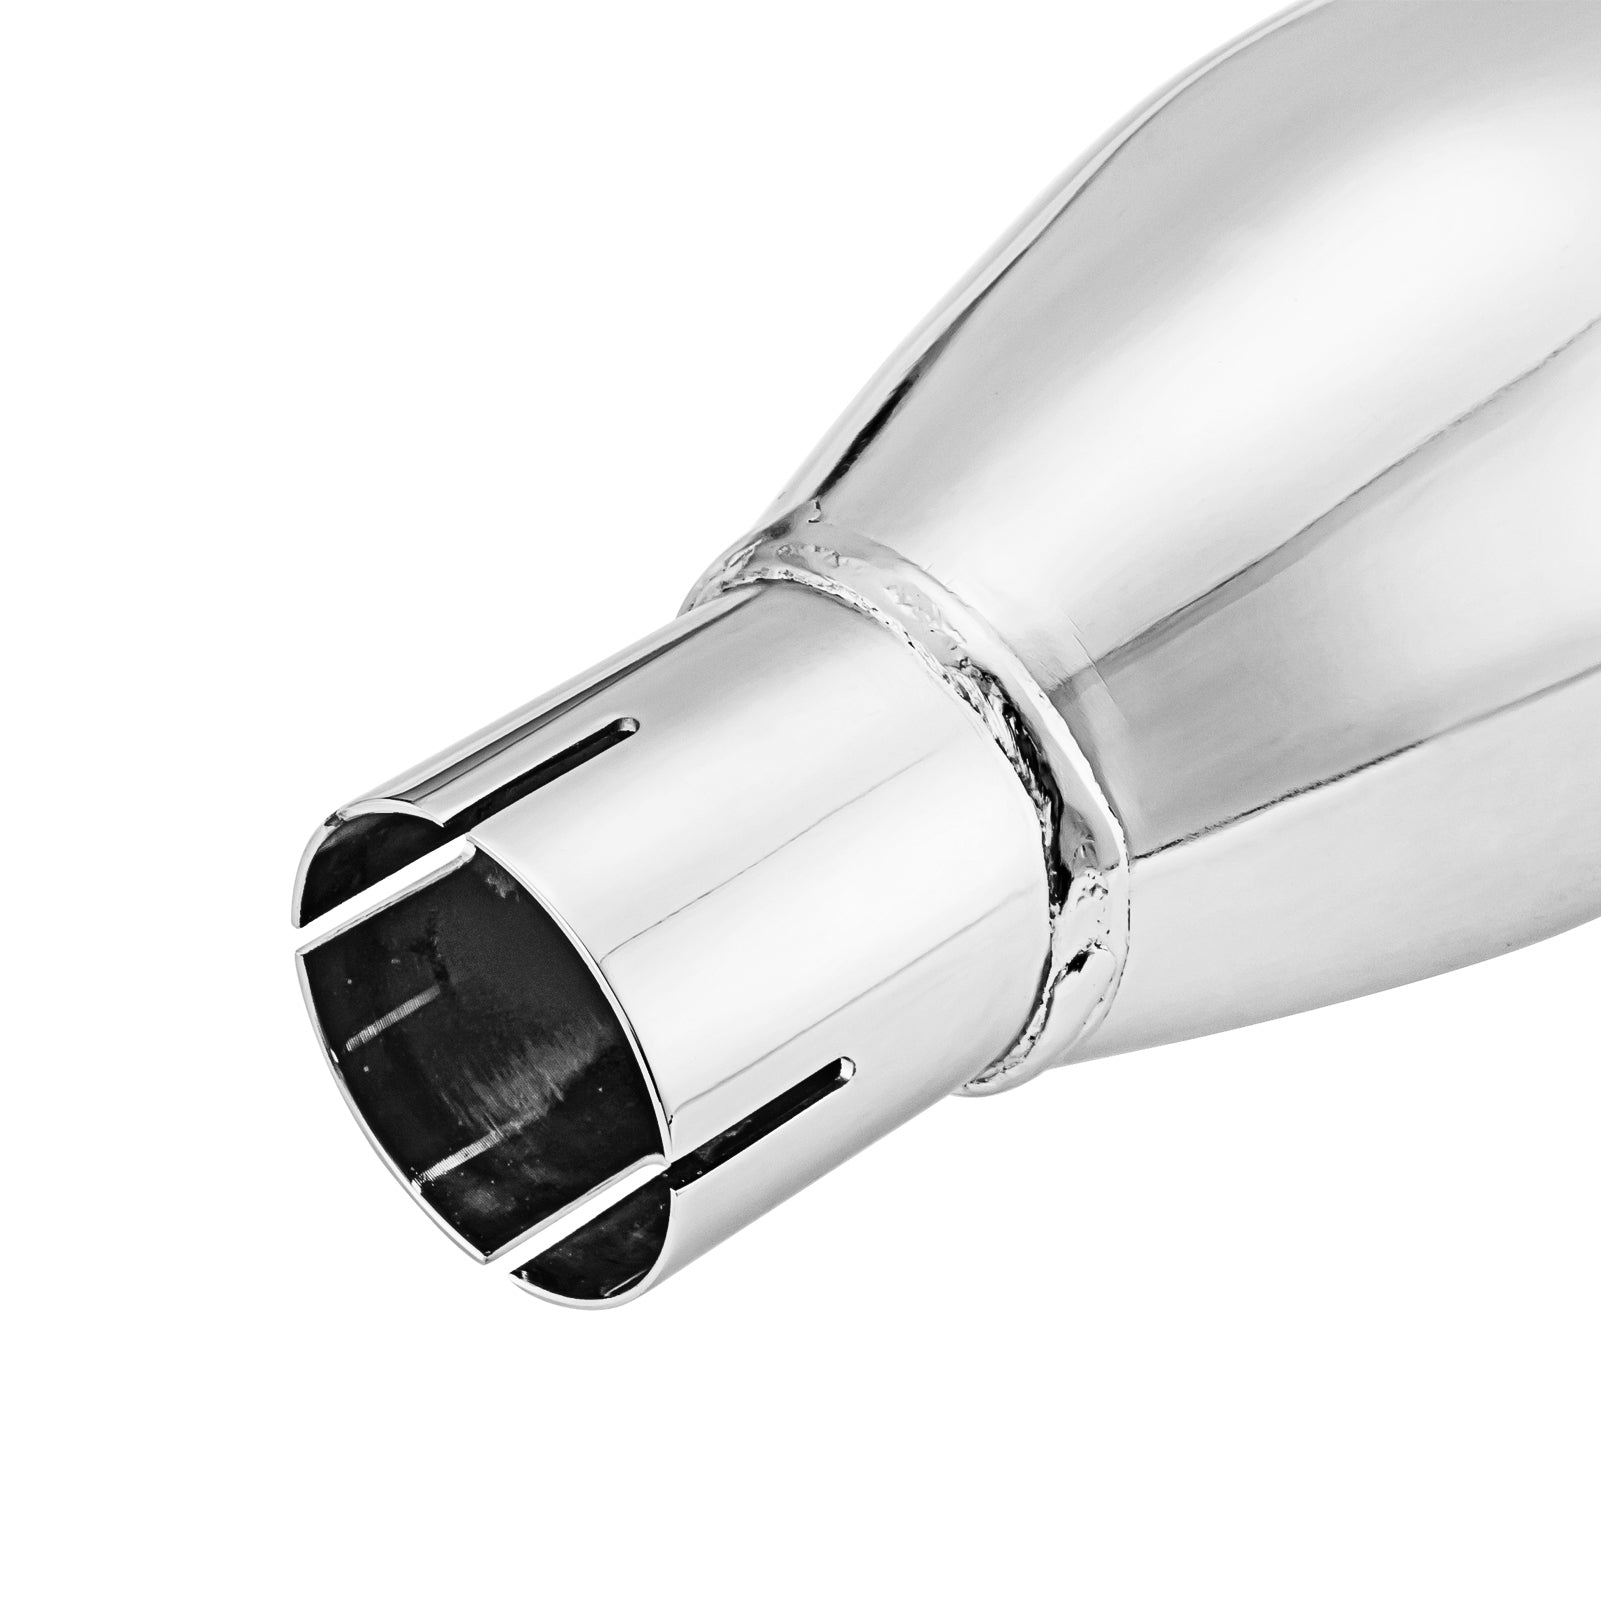 Chrome 4" Slip-On Mufflers Exhaust, Exhaust Pipes For 2017-up for Harley Touring